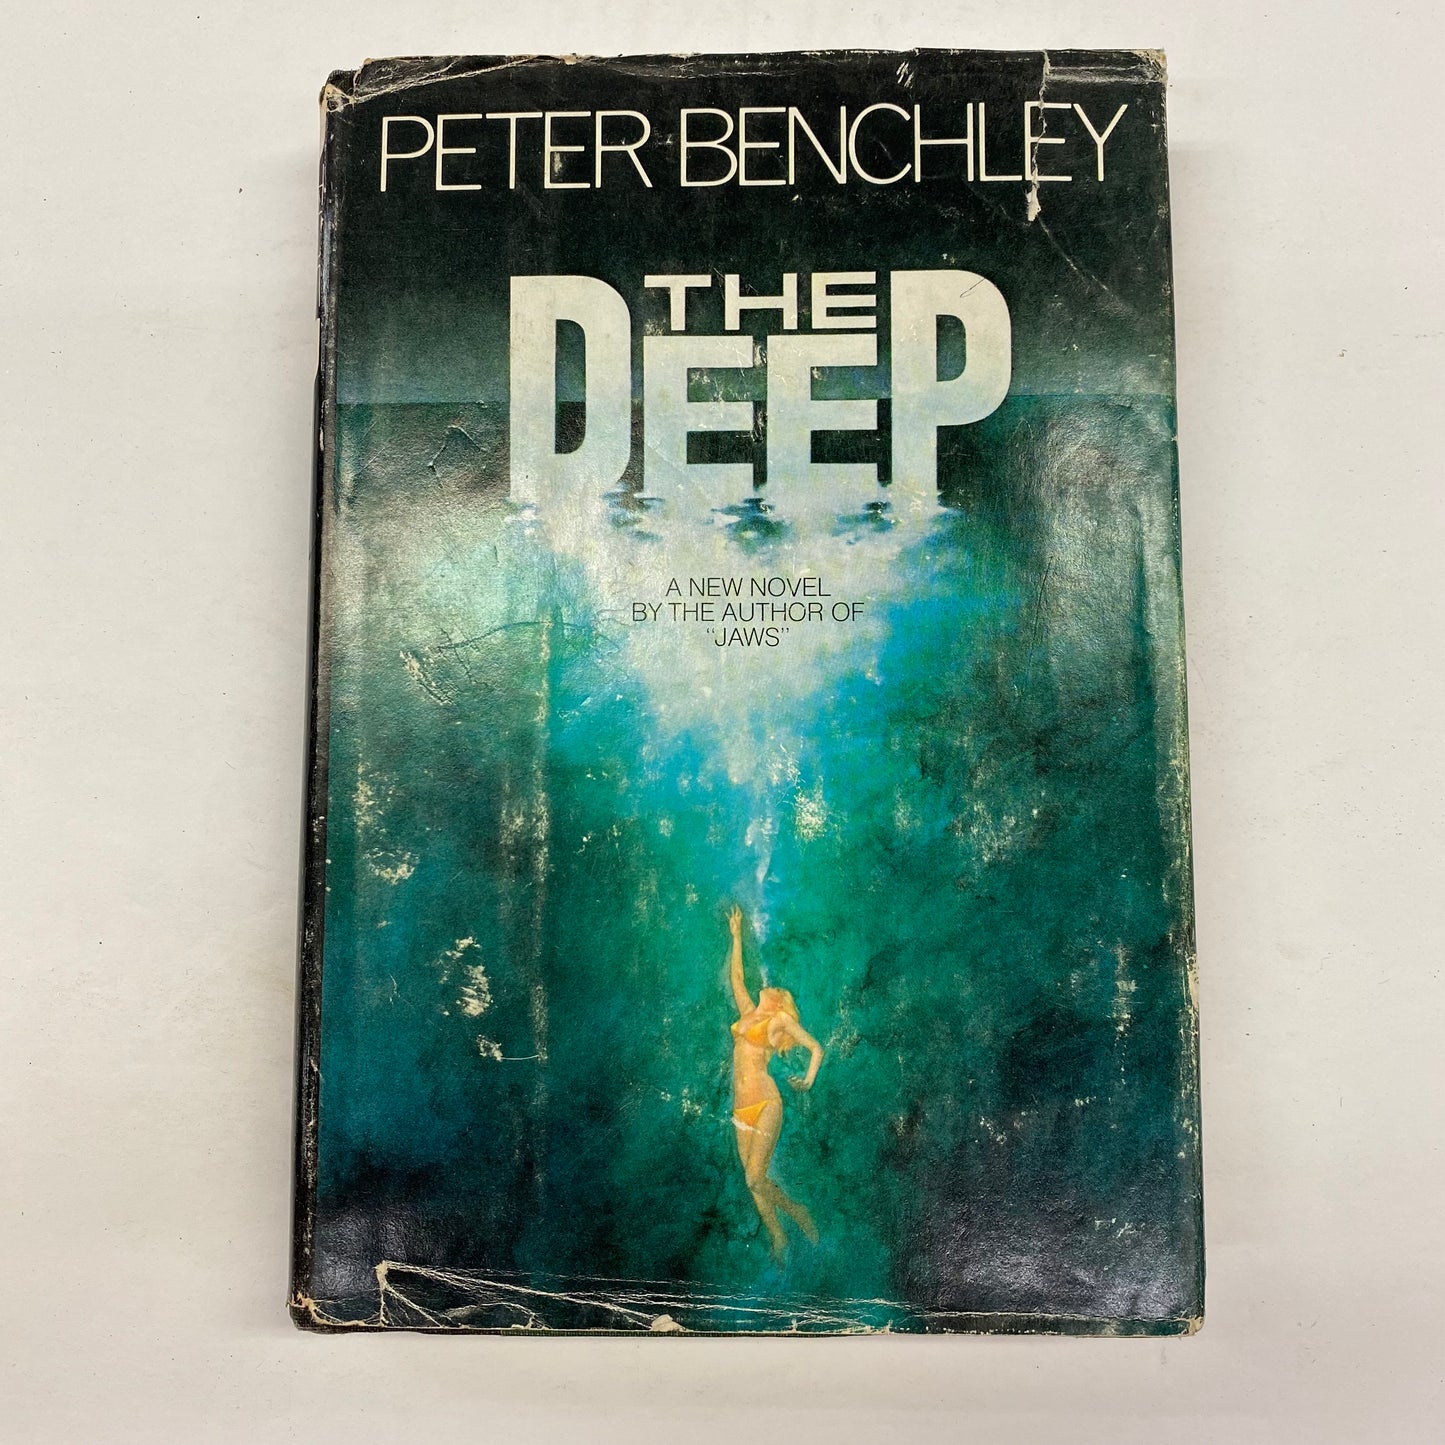 The Deep - Peter Benchley - 1st Edition - 1976